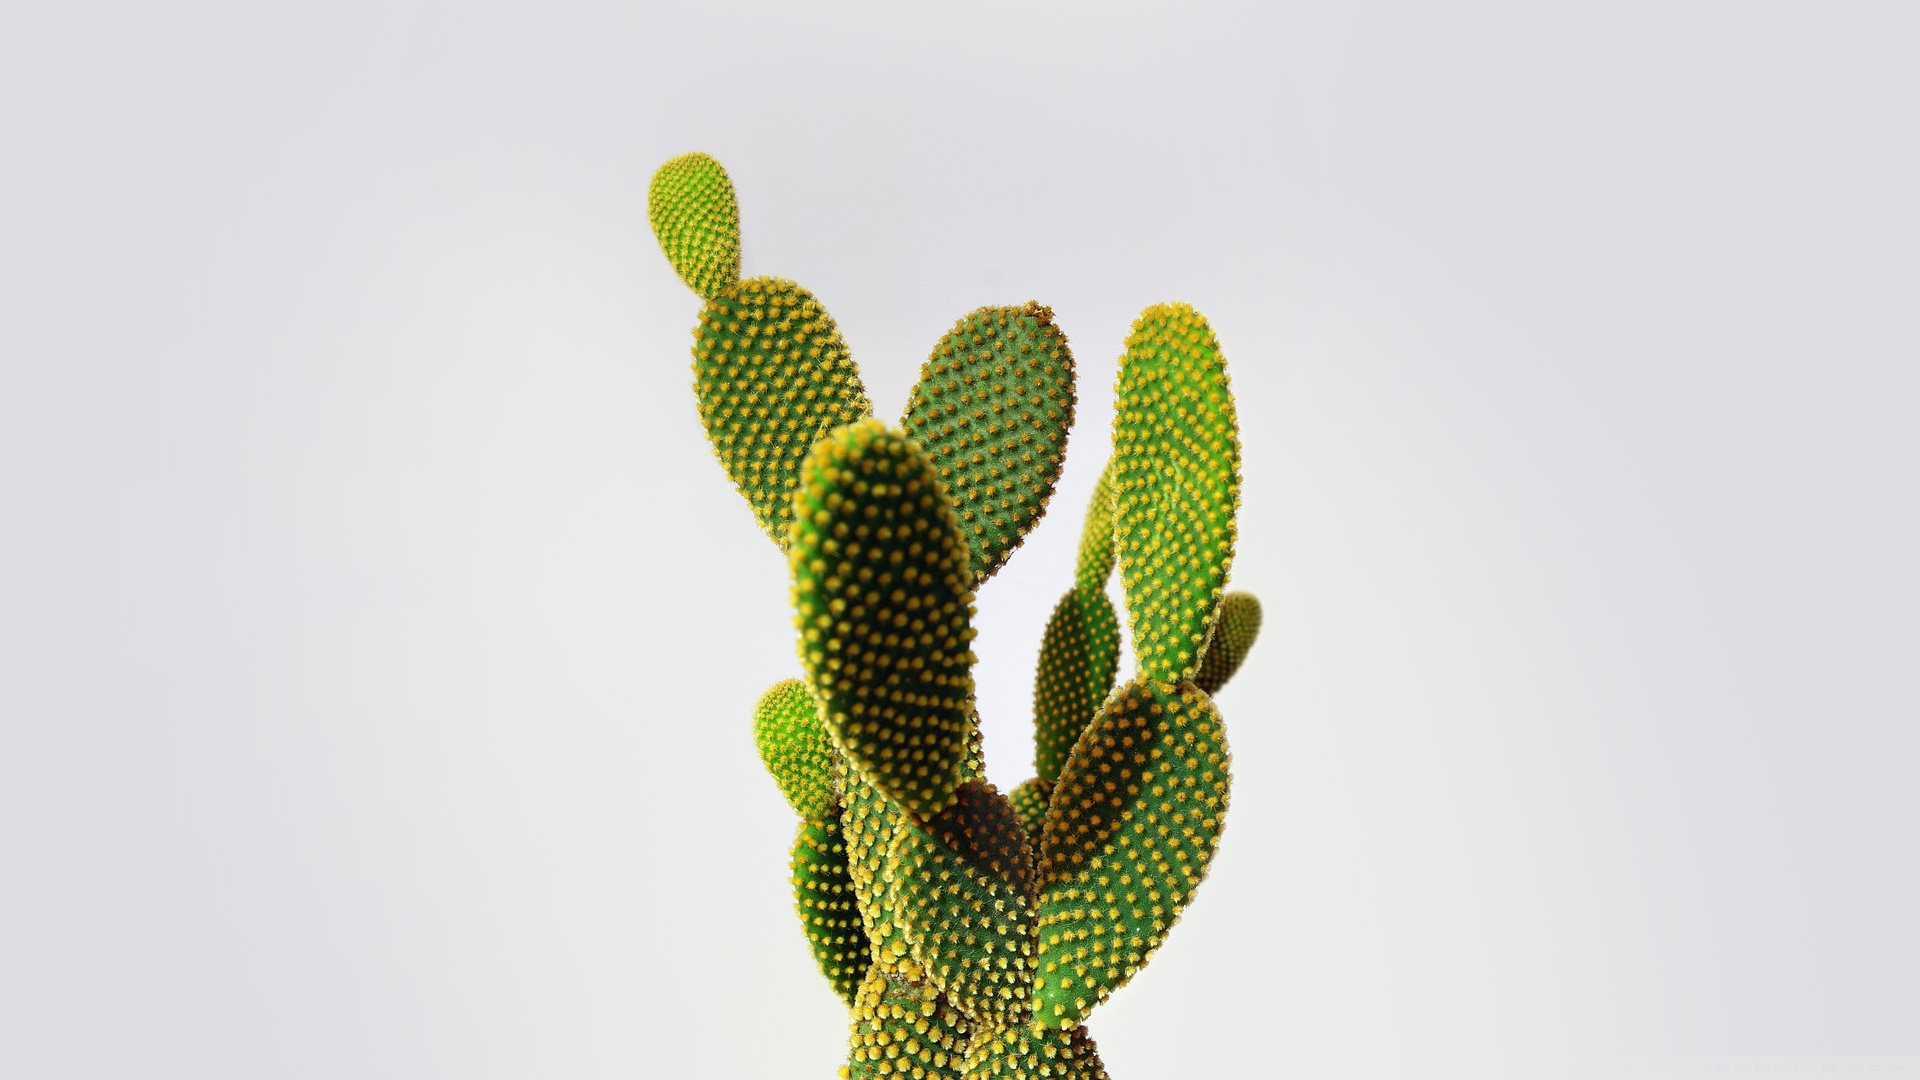 Amazing Cactus Pictures & Backgrounds